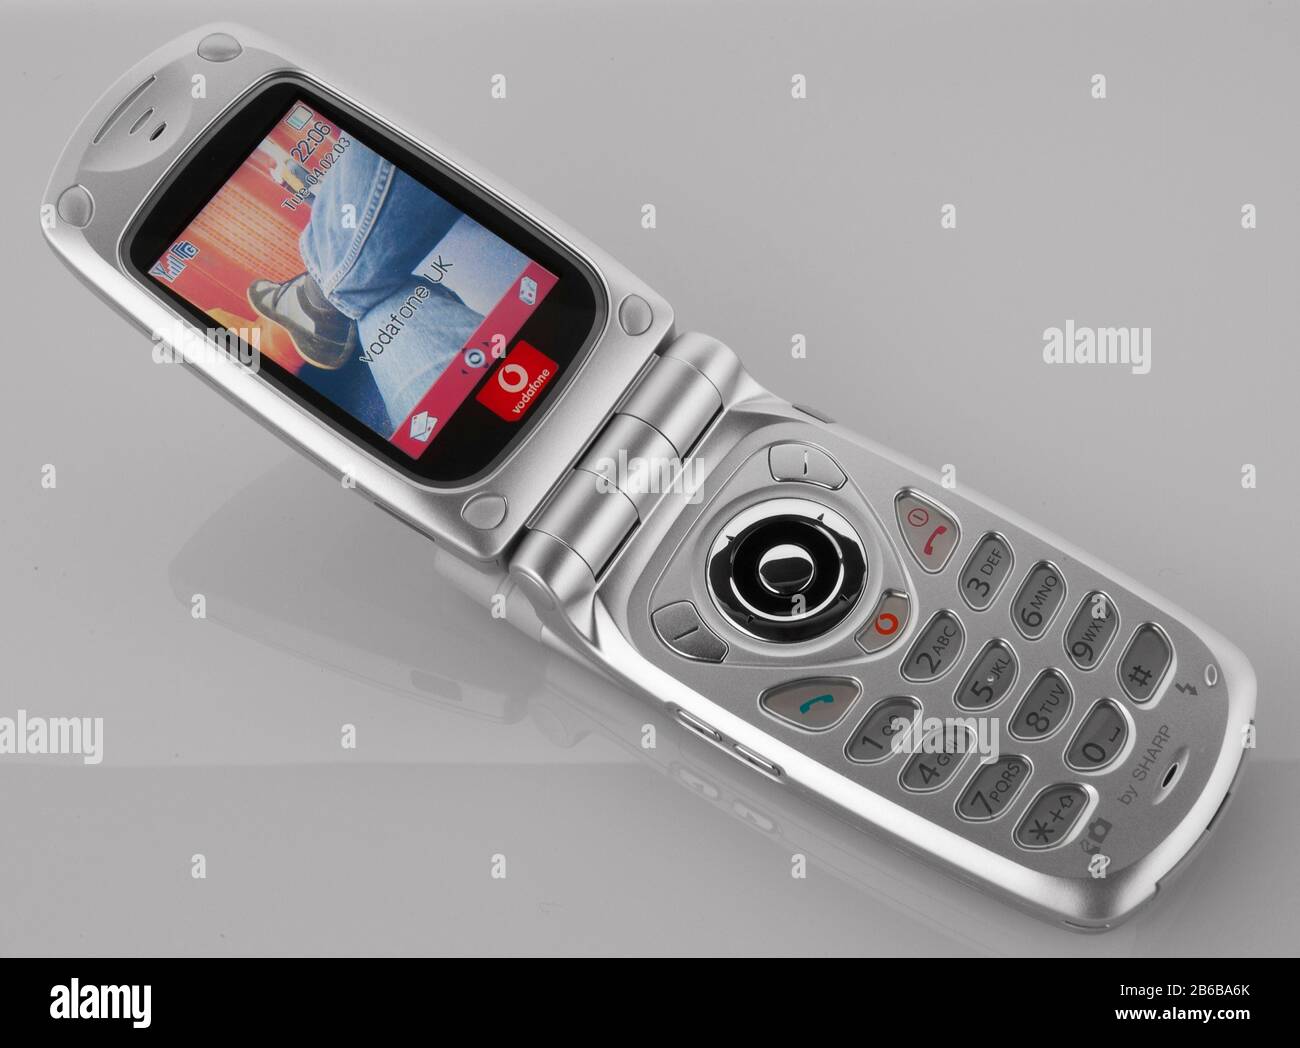 Old style 1990's mobile phone. Sharp Mobile telephone with colour screen on Vodafone. Stock Photo